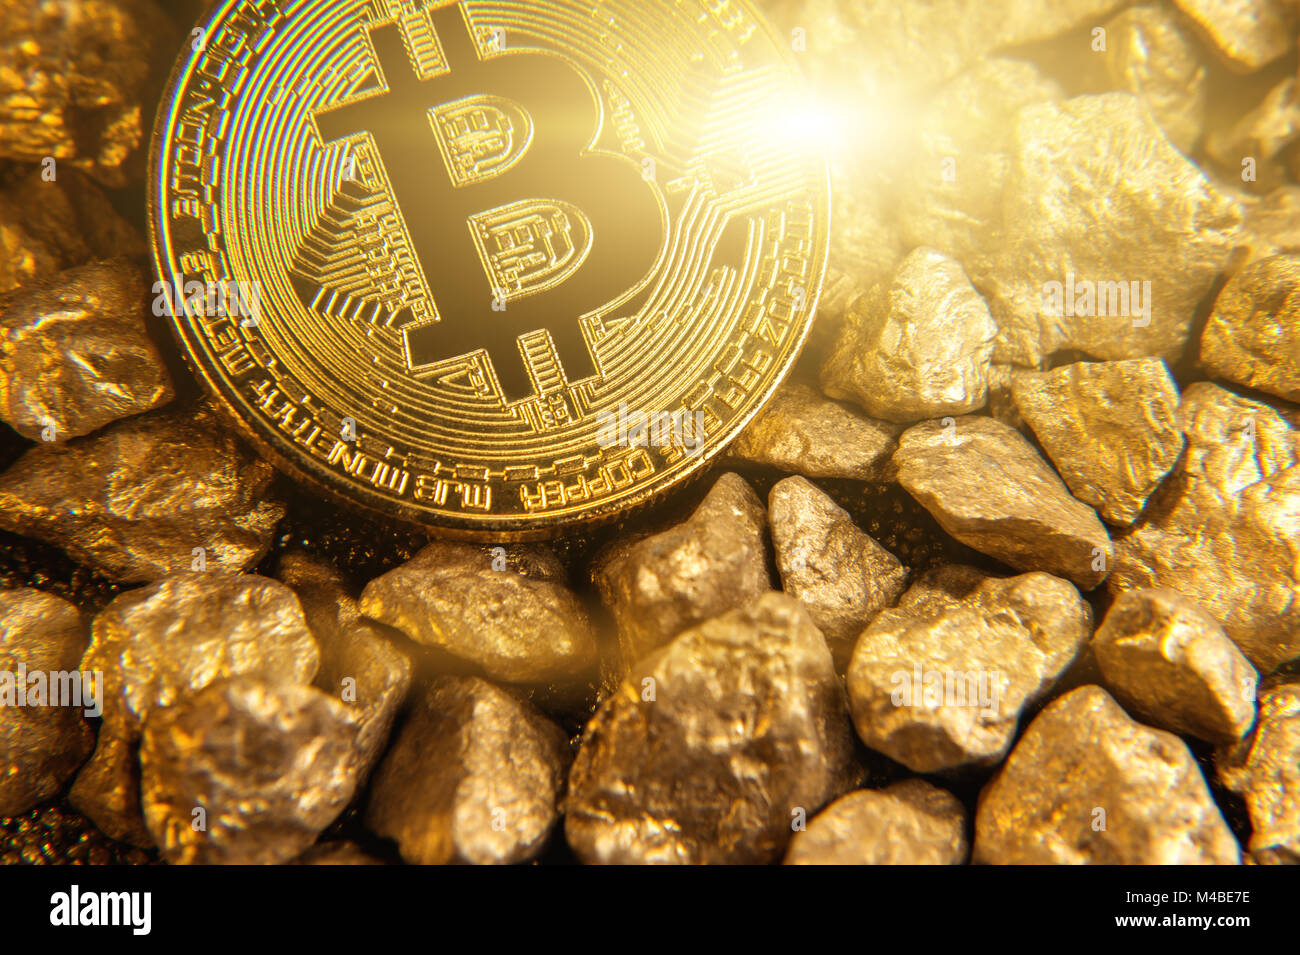 Golden shining bitcoin on mound of gold Stock Photo